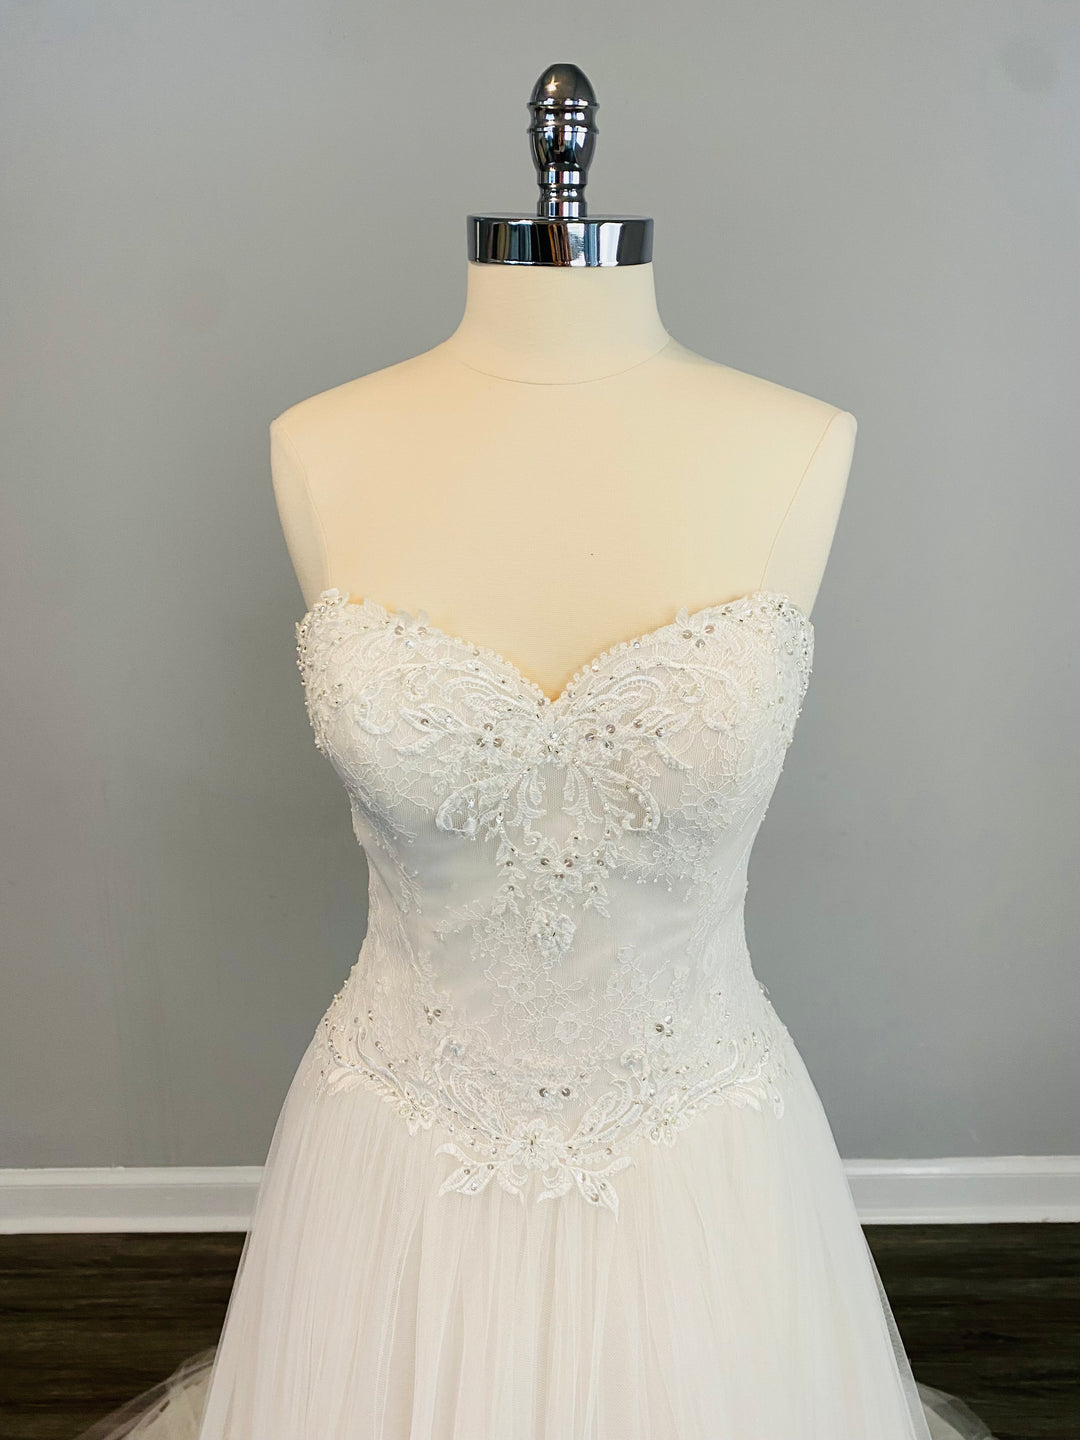 Dropped Waist A-Line Gown by Justin Alexander Style 44065 Size 14